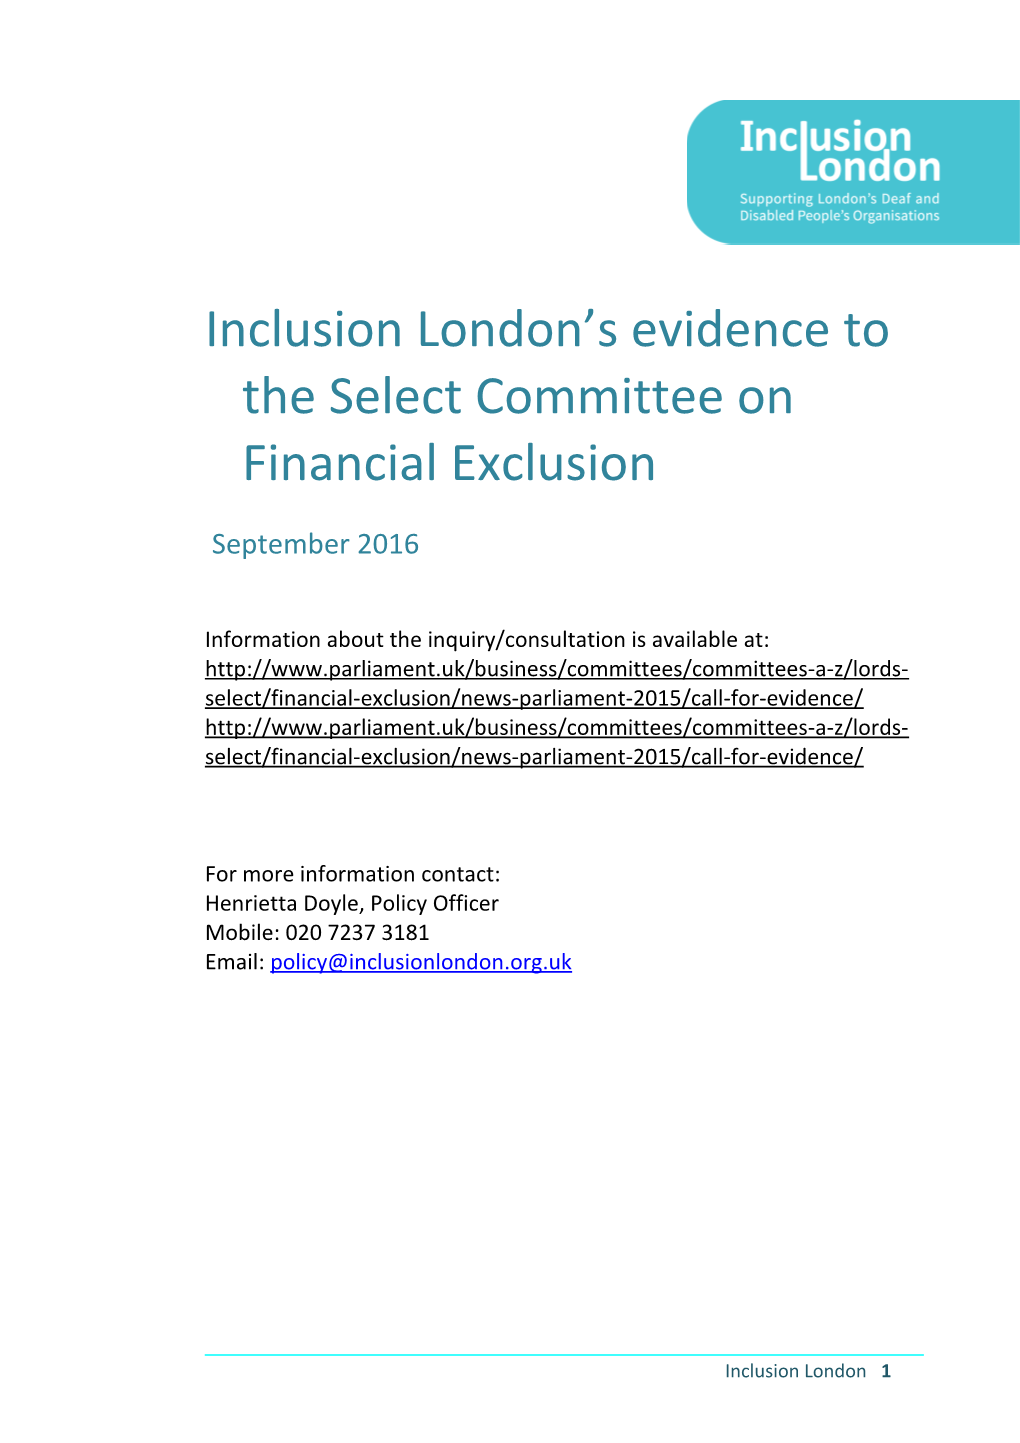 Inclusion London Sevidence to the Select Committee on Financial Exclusion